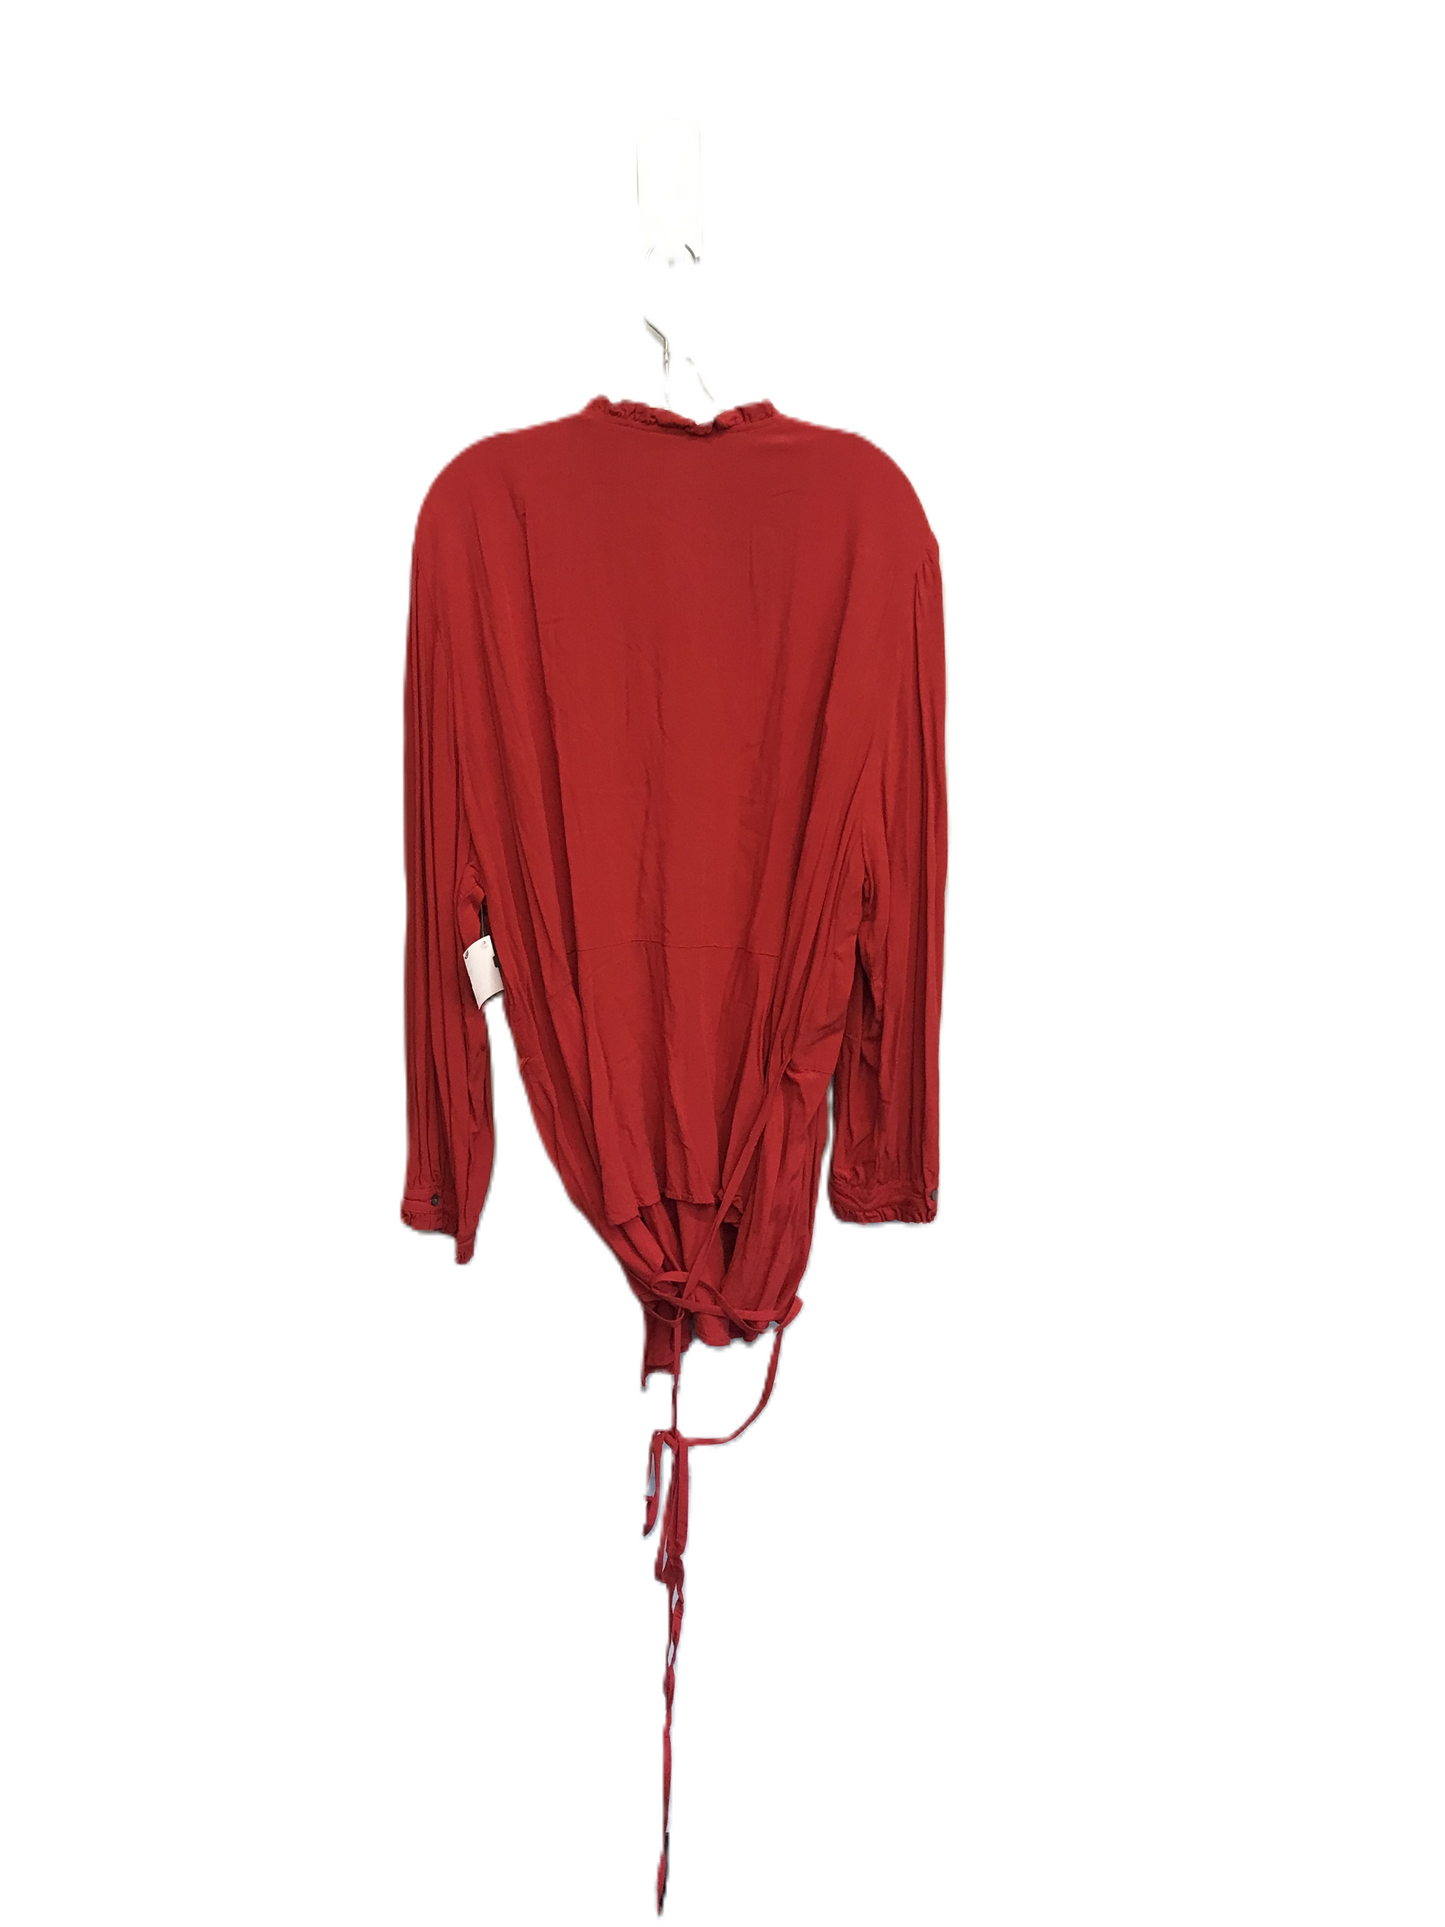 Red Top Long Sleeve By Loft, Size: 4x